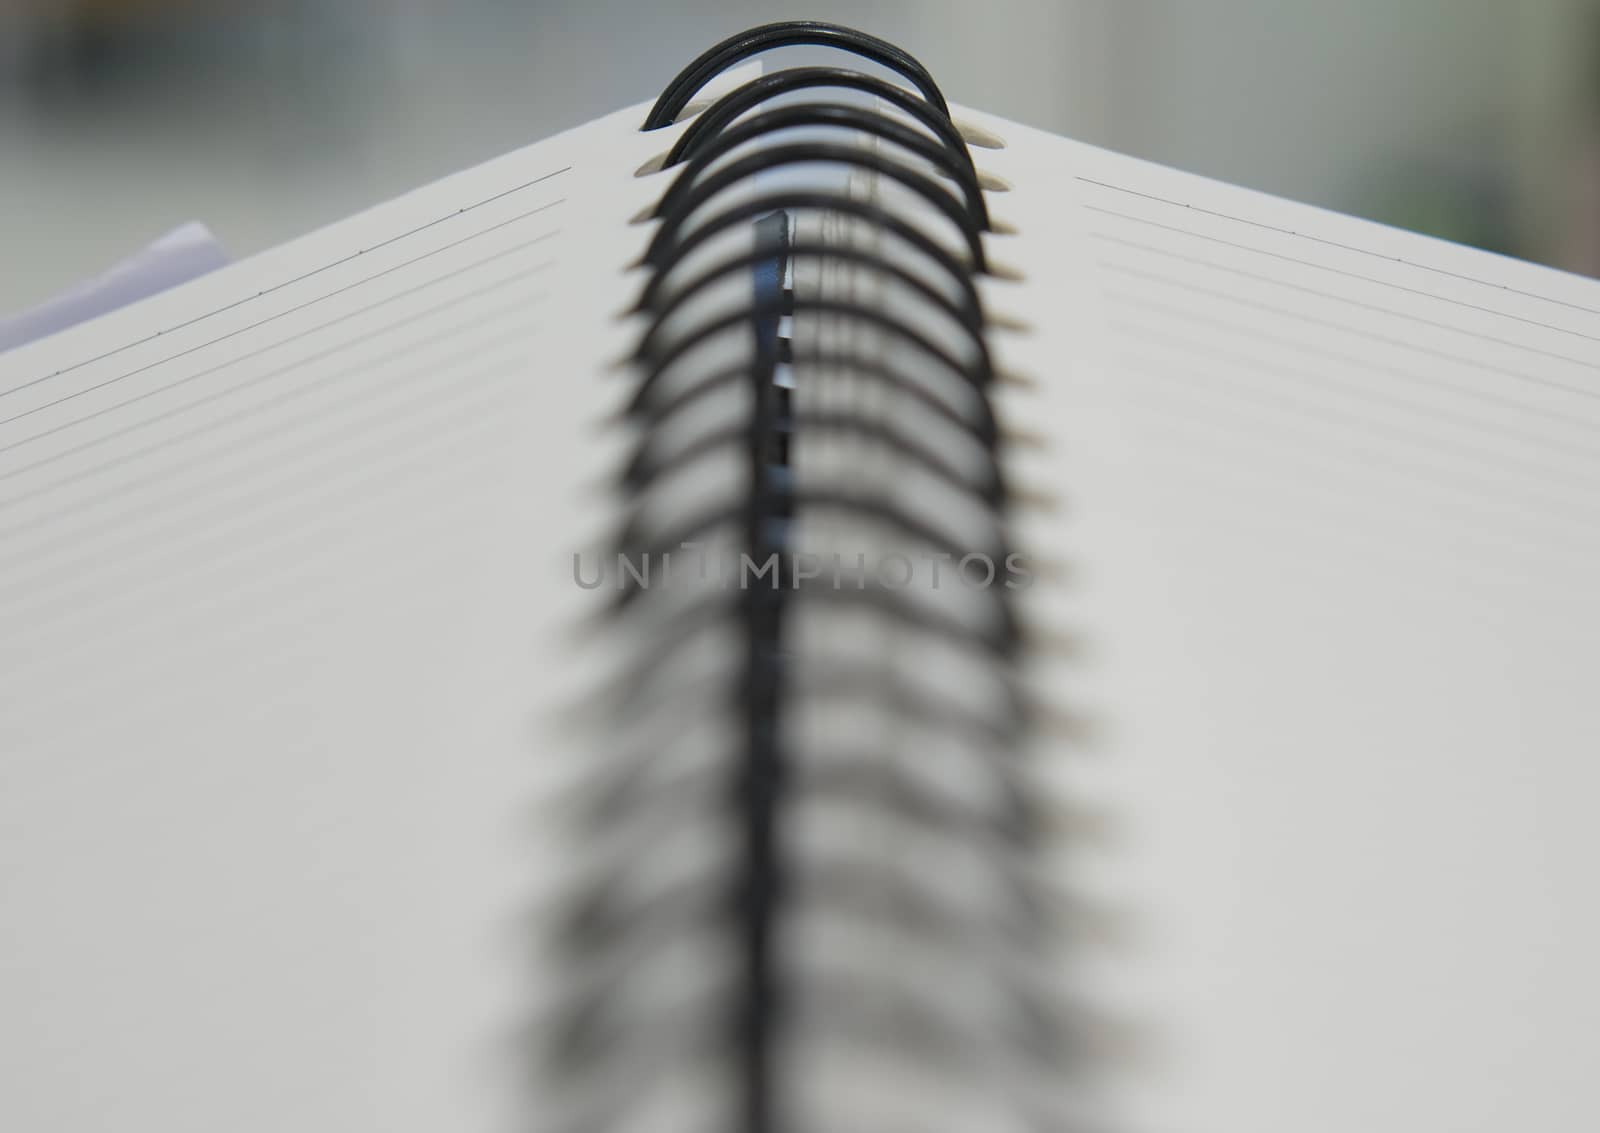 Binder notebook at office by ninun